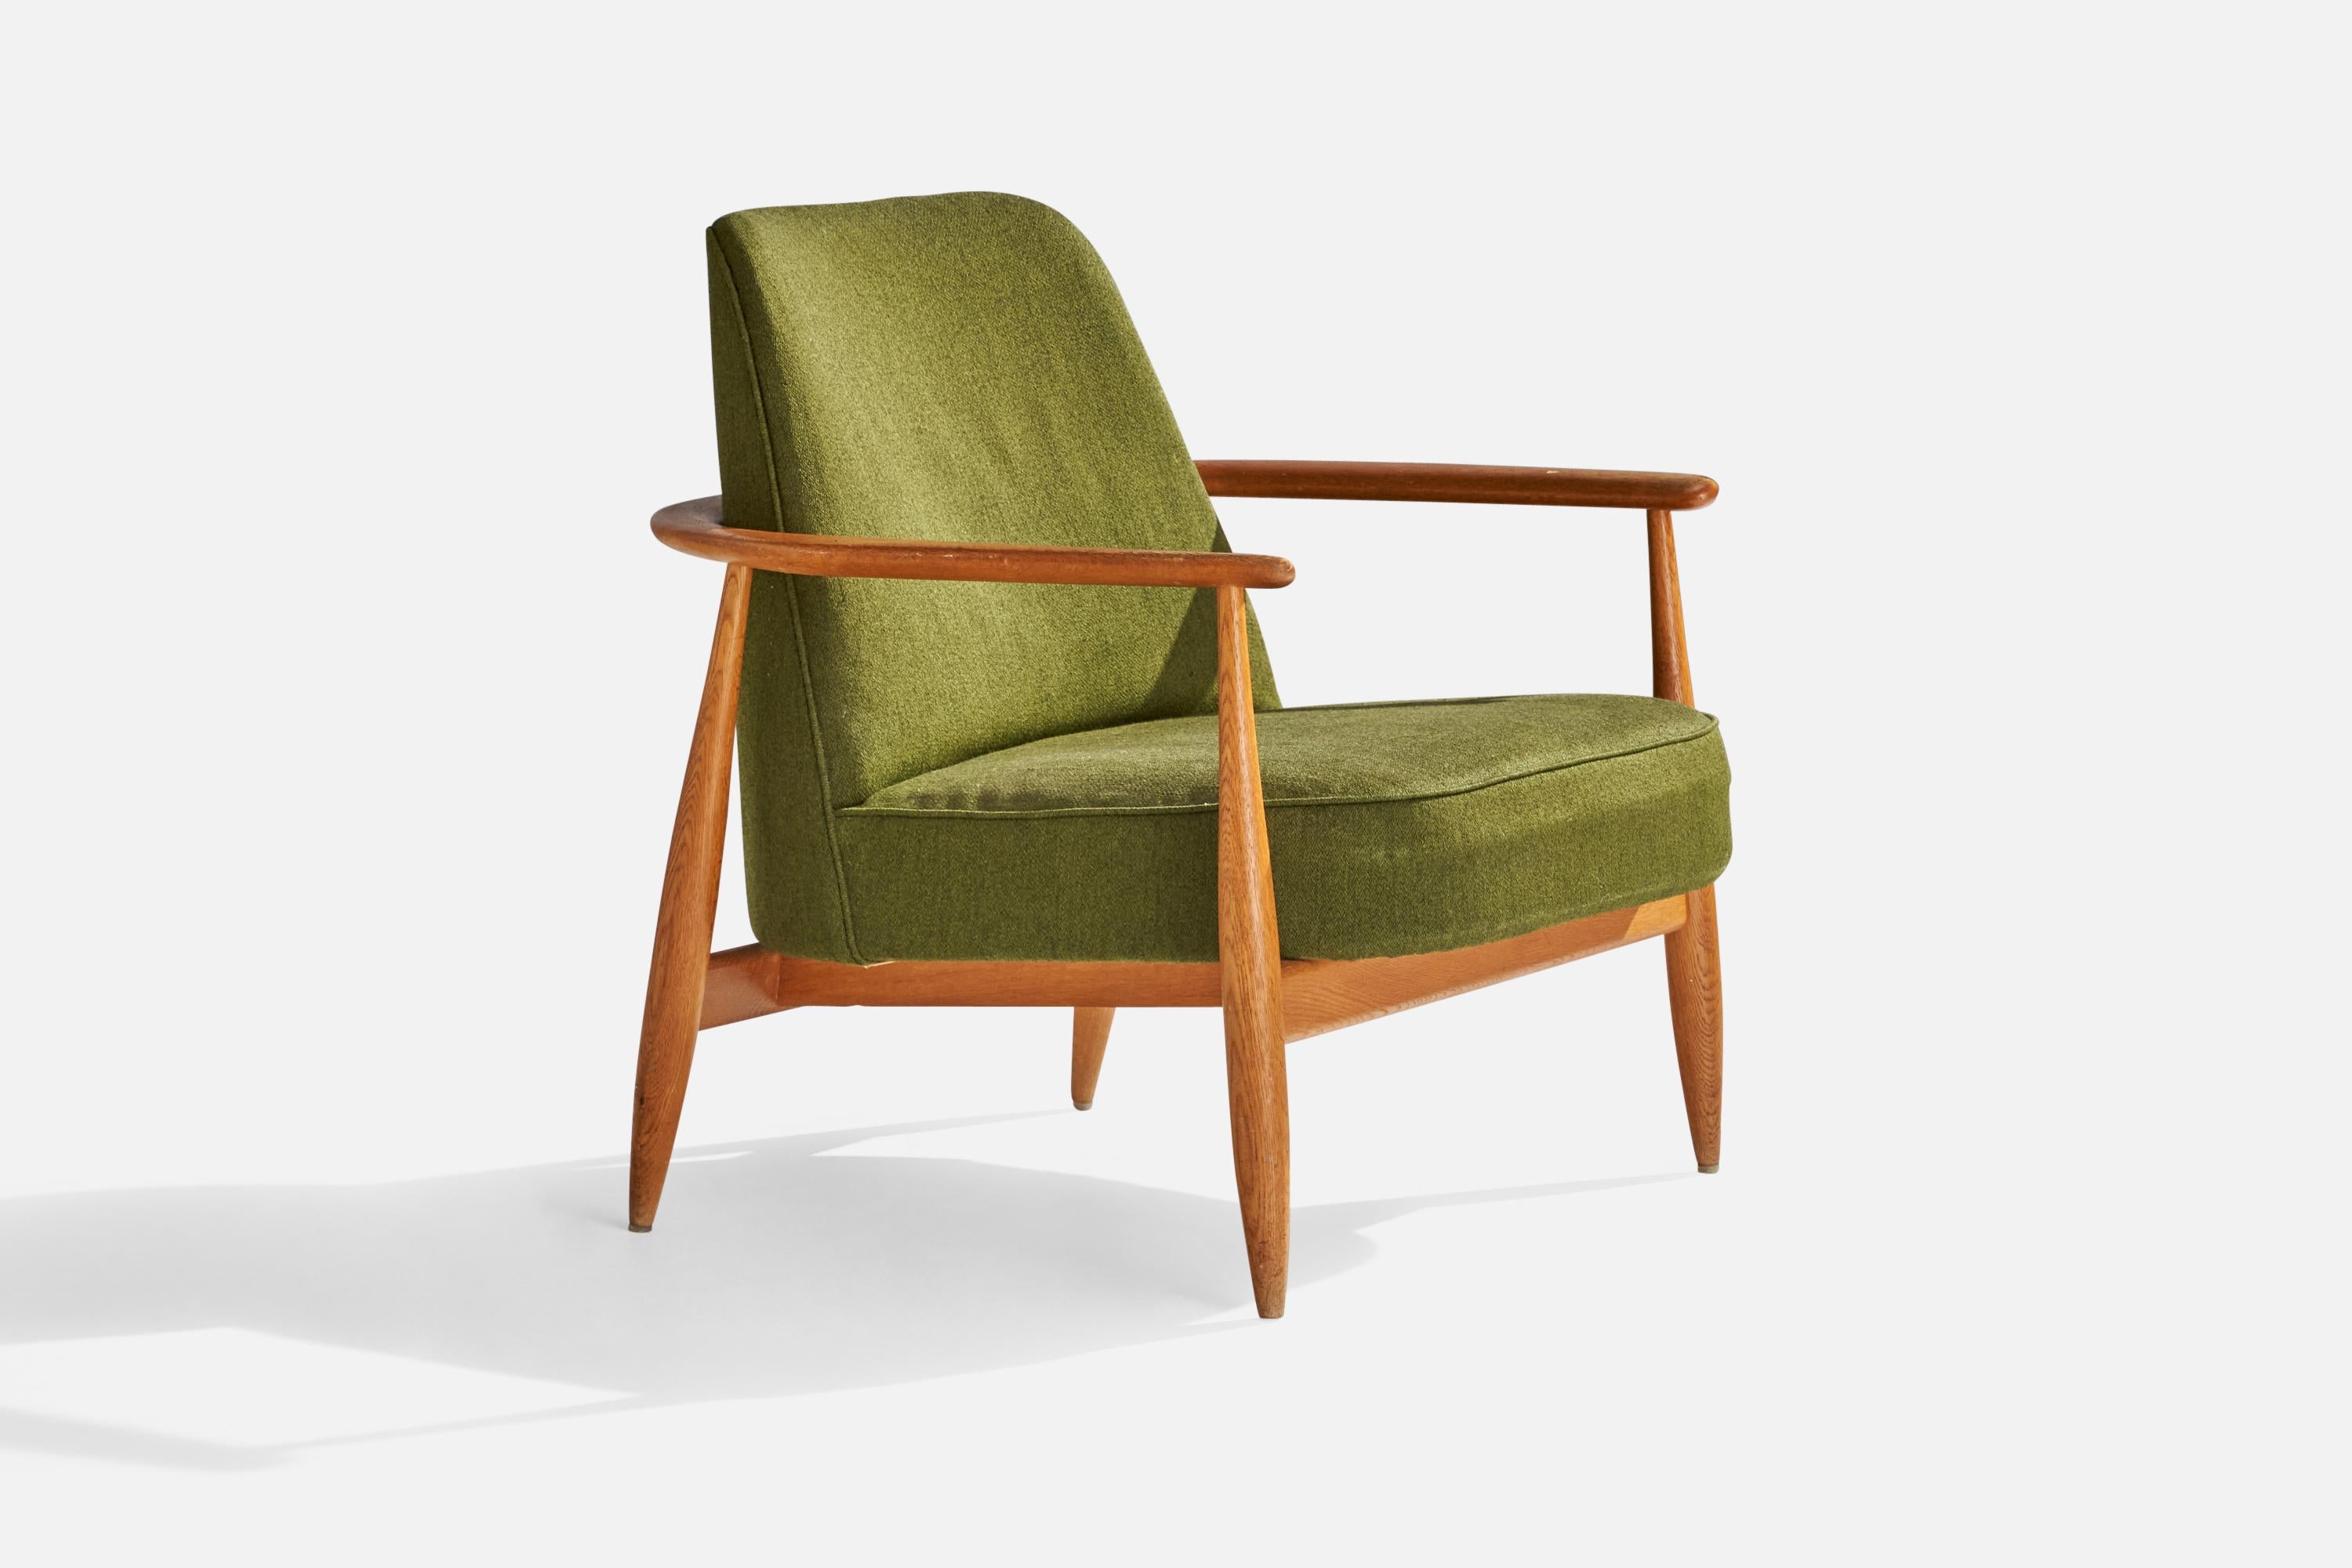 An oak and green fabric lounge chair designed and produced in Sweden, c. 1950s.

seat height 15.5” 